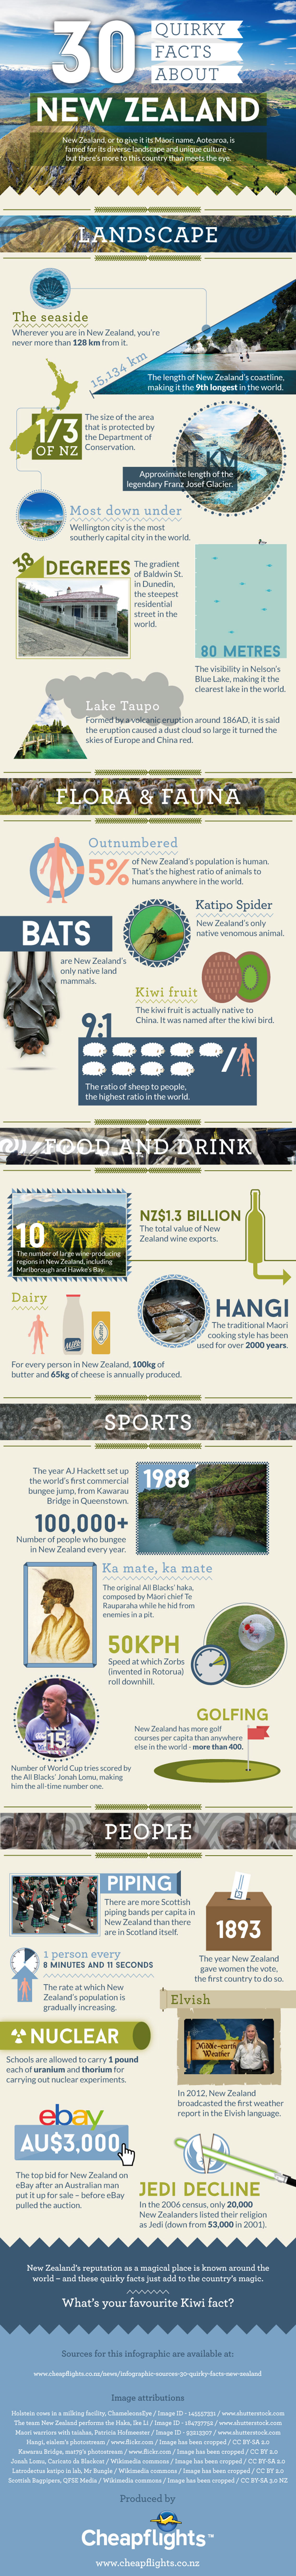 30 Interesting Facts About New Zealand - Travel infographic